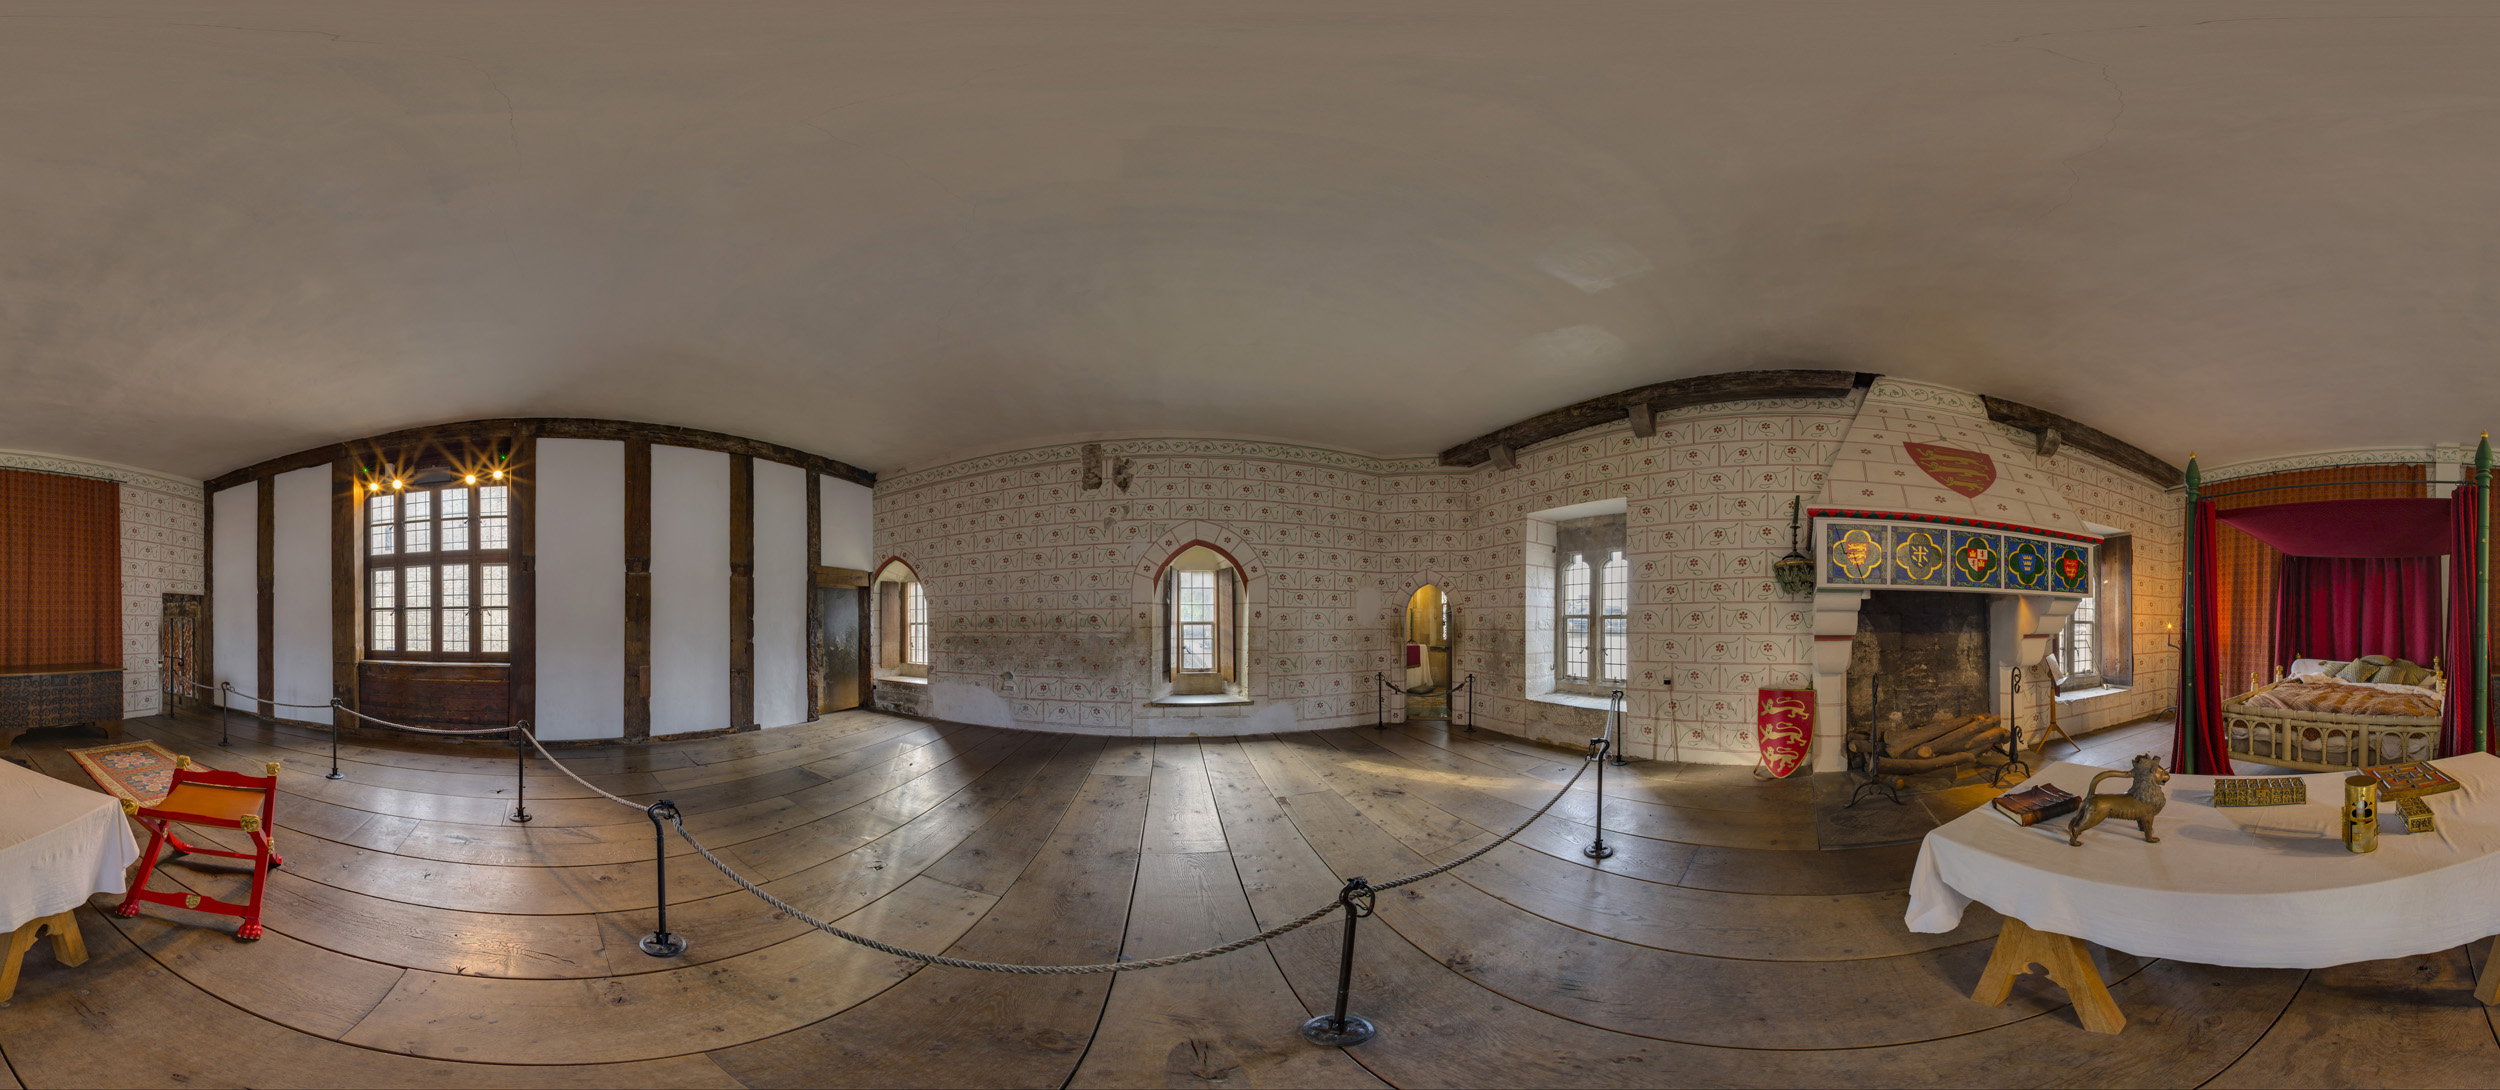 360 immersive panoramic London, Janie Fitzgerald architectural photography.